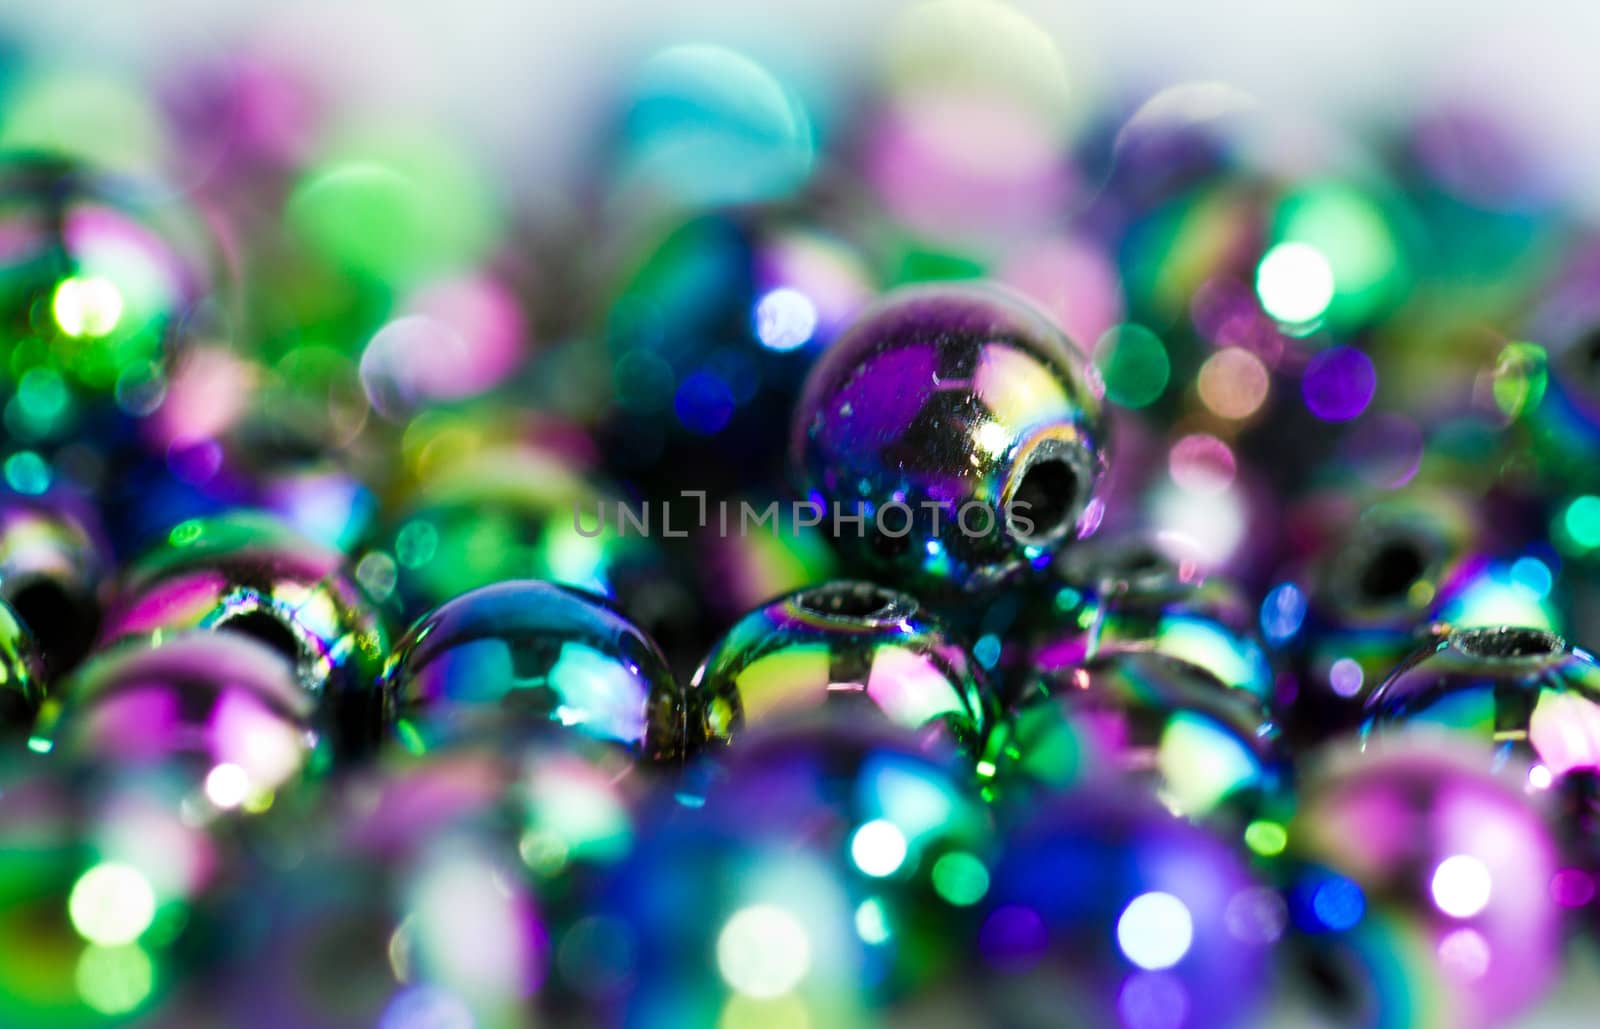 Blue beads on bluish background with colorful reflection and bokeh in landscape orientation